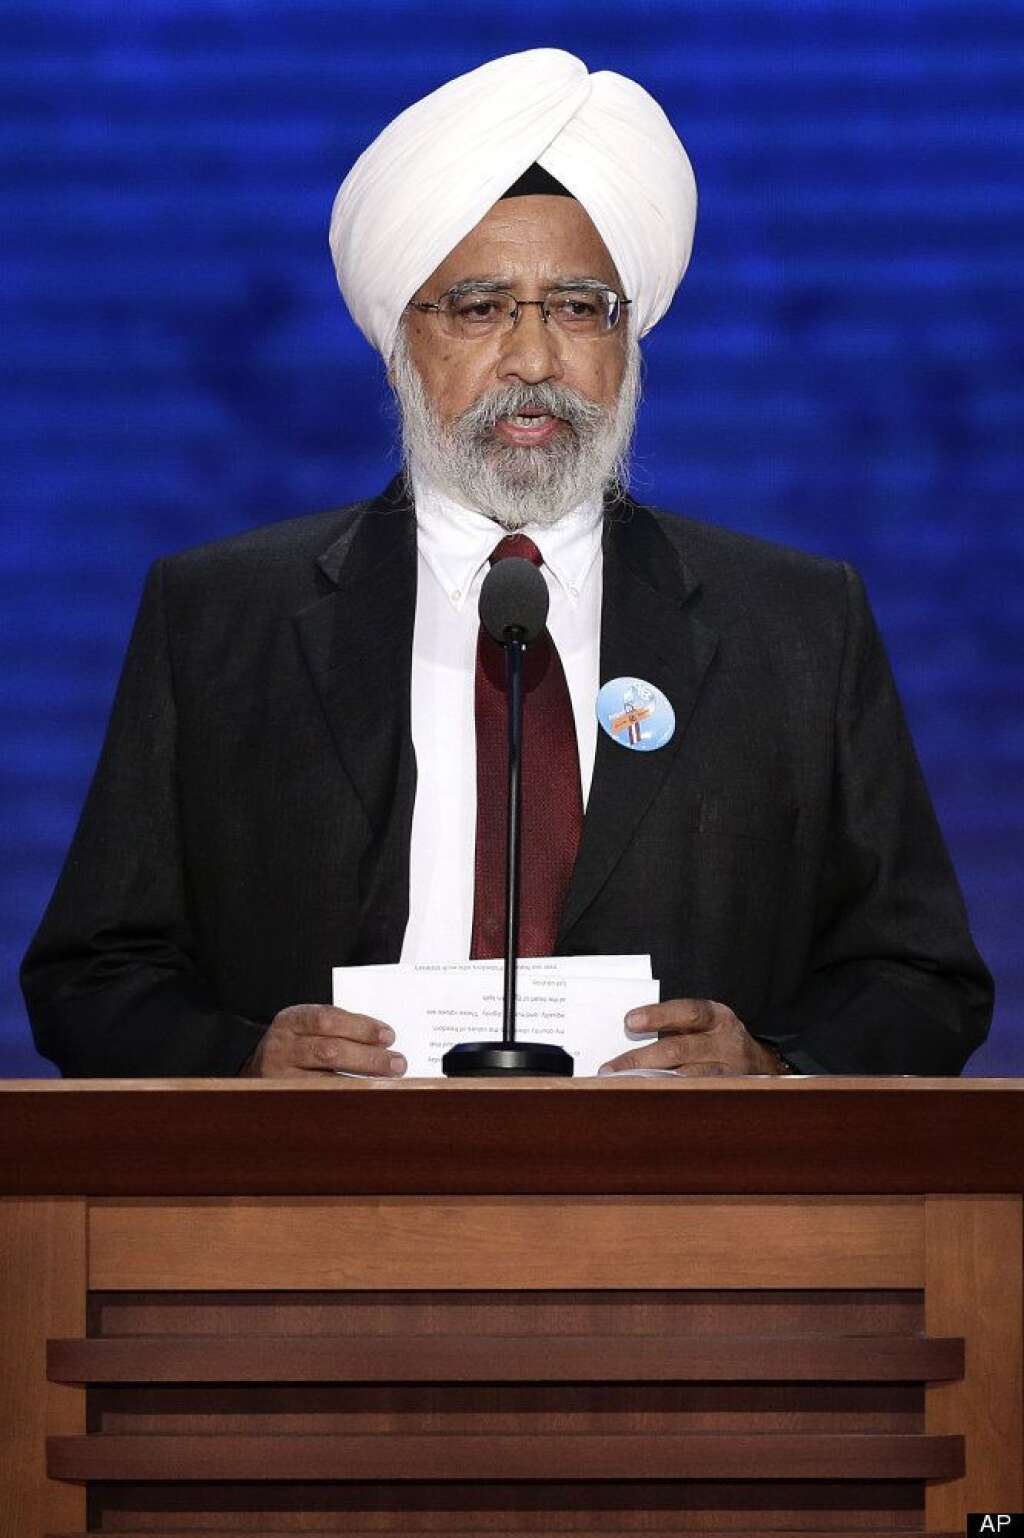 Ishwar Singh - Ishwar Singh delivers the invocation during the Republican National Convention in Tampa, Fla., on Wednesday, Aug. 29, 2012. (AP Photo/J. Scott Applewhite)